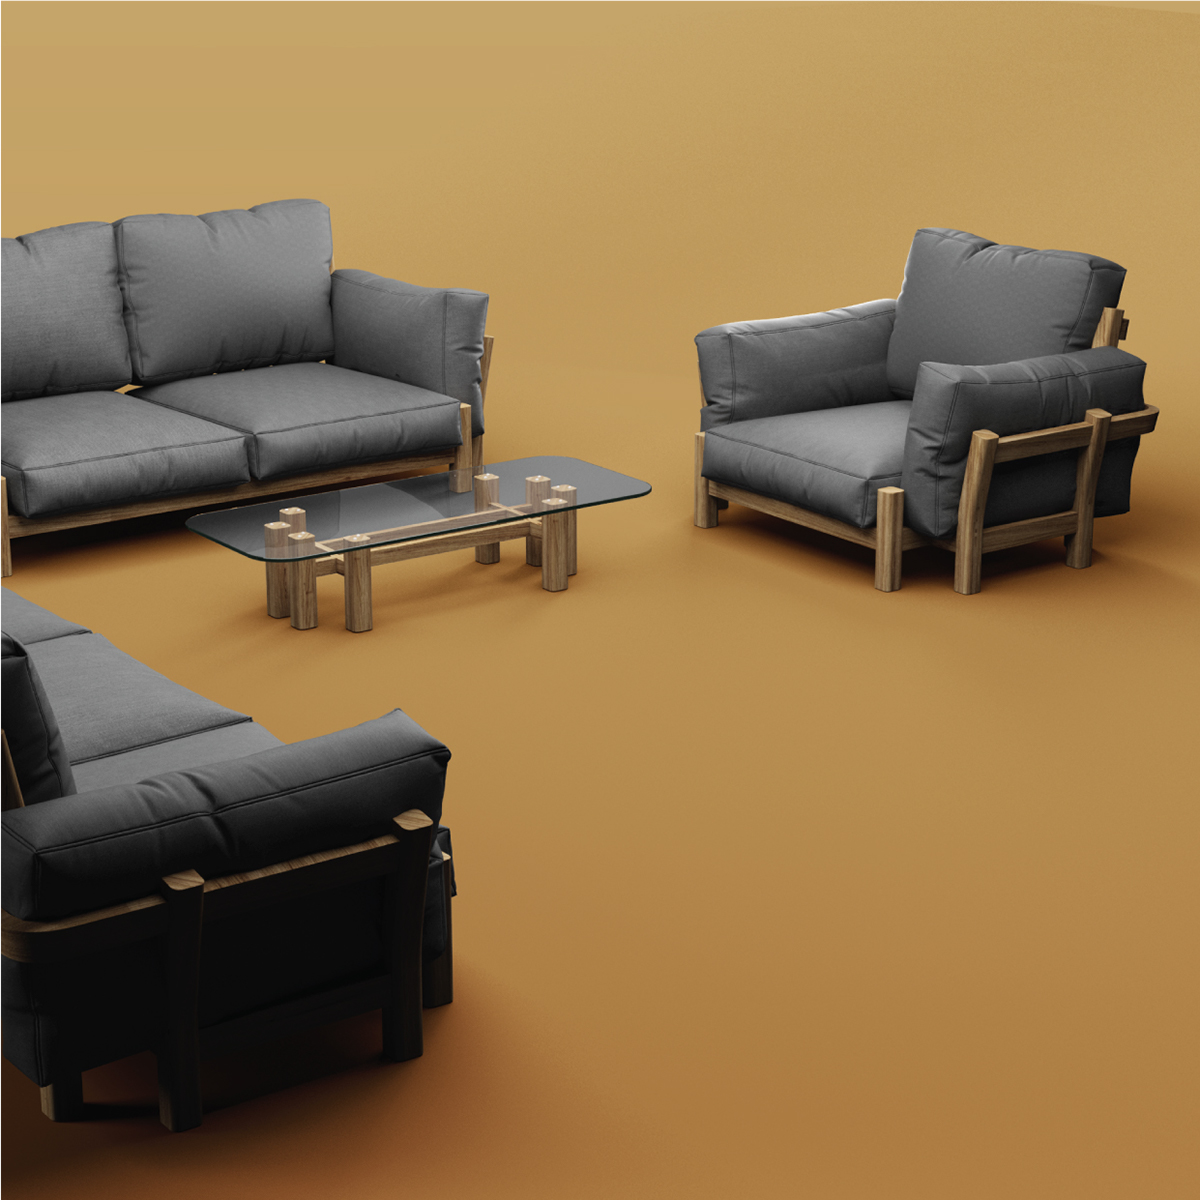 furniture japan fence sofa Couch wood simple double triple armchair banquette seat mimimalist slick Montreal